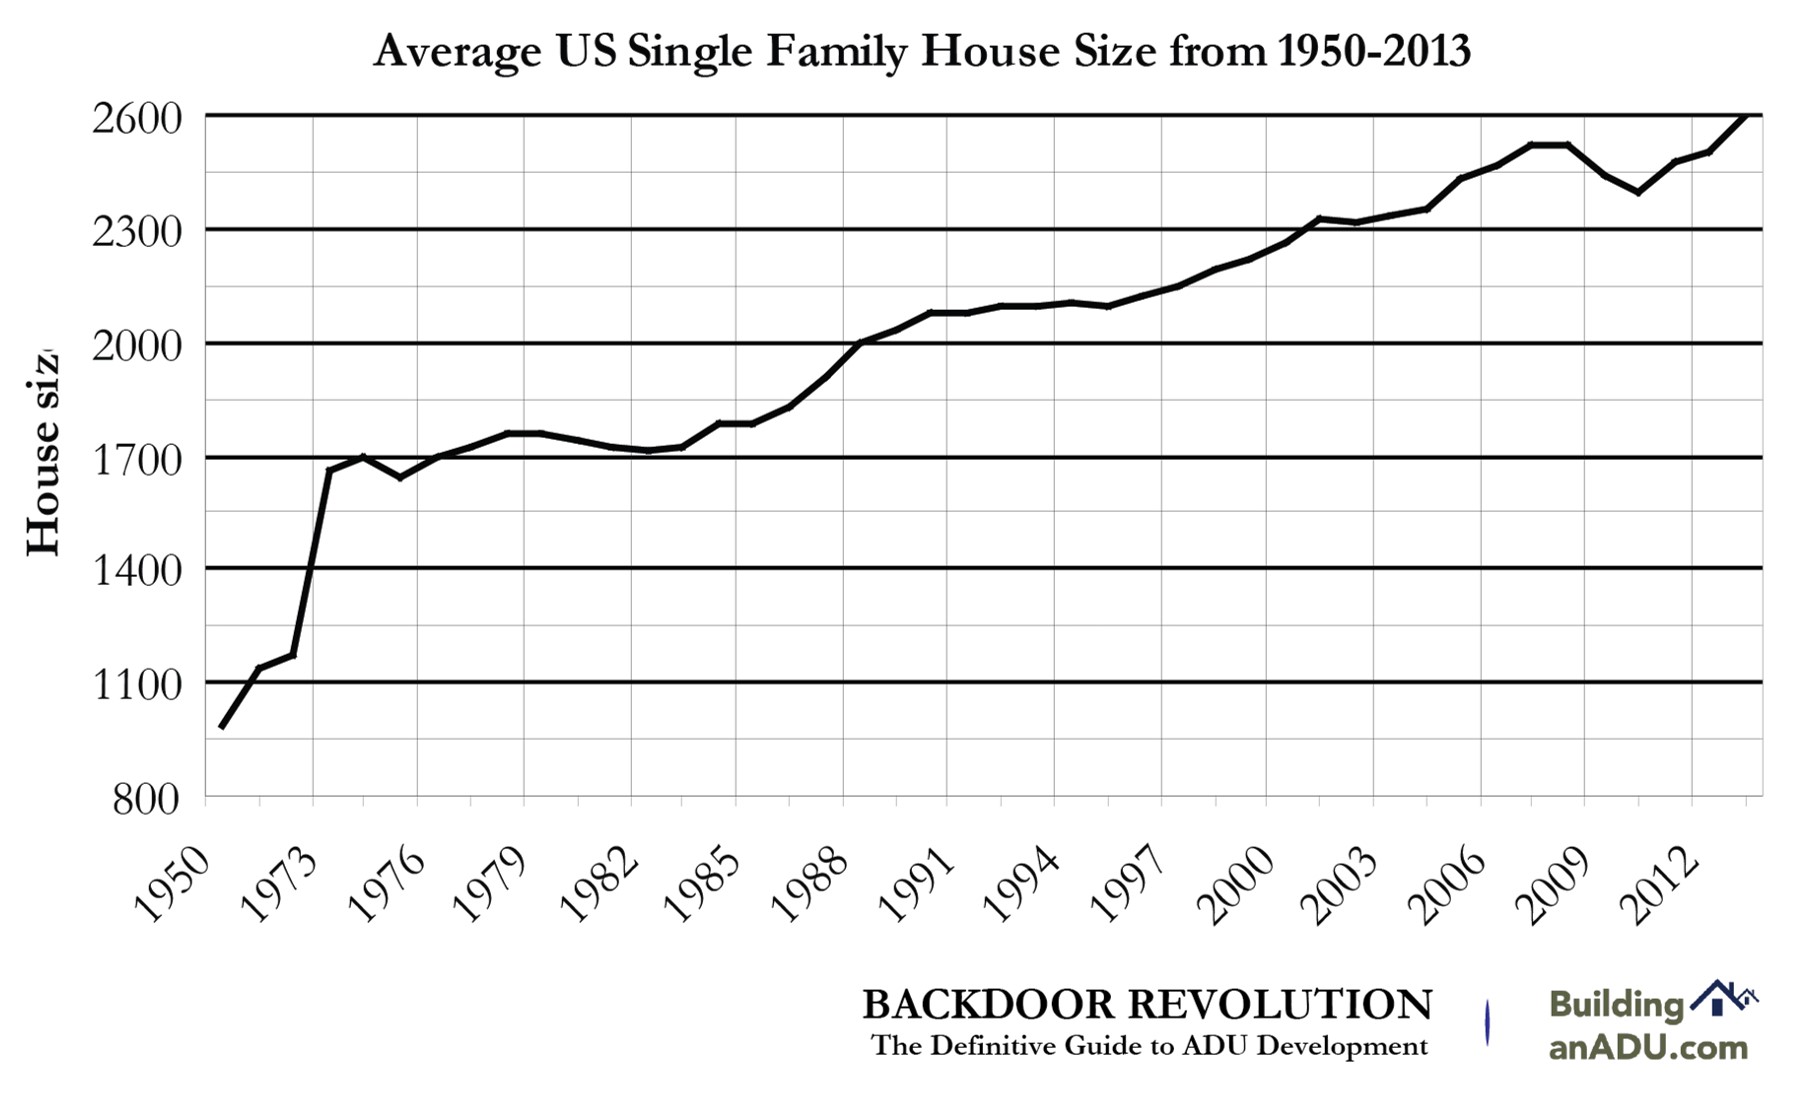  Single family home sizes in the US have increased dramatically since 1950.&nbsp; 